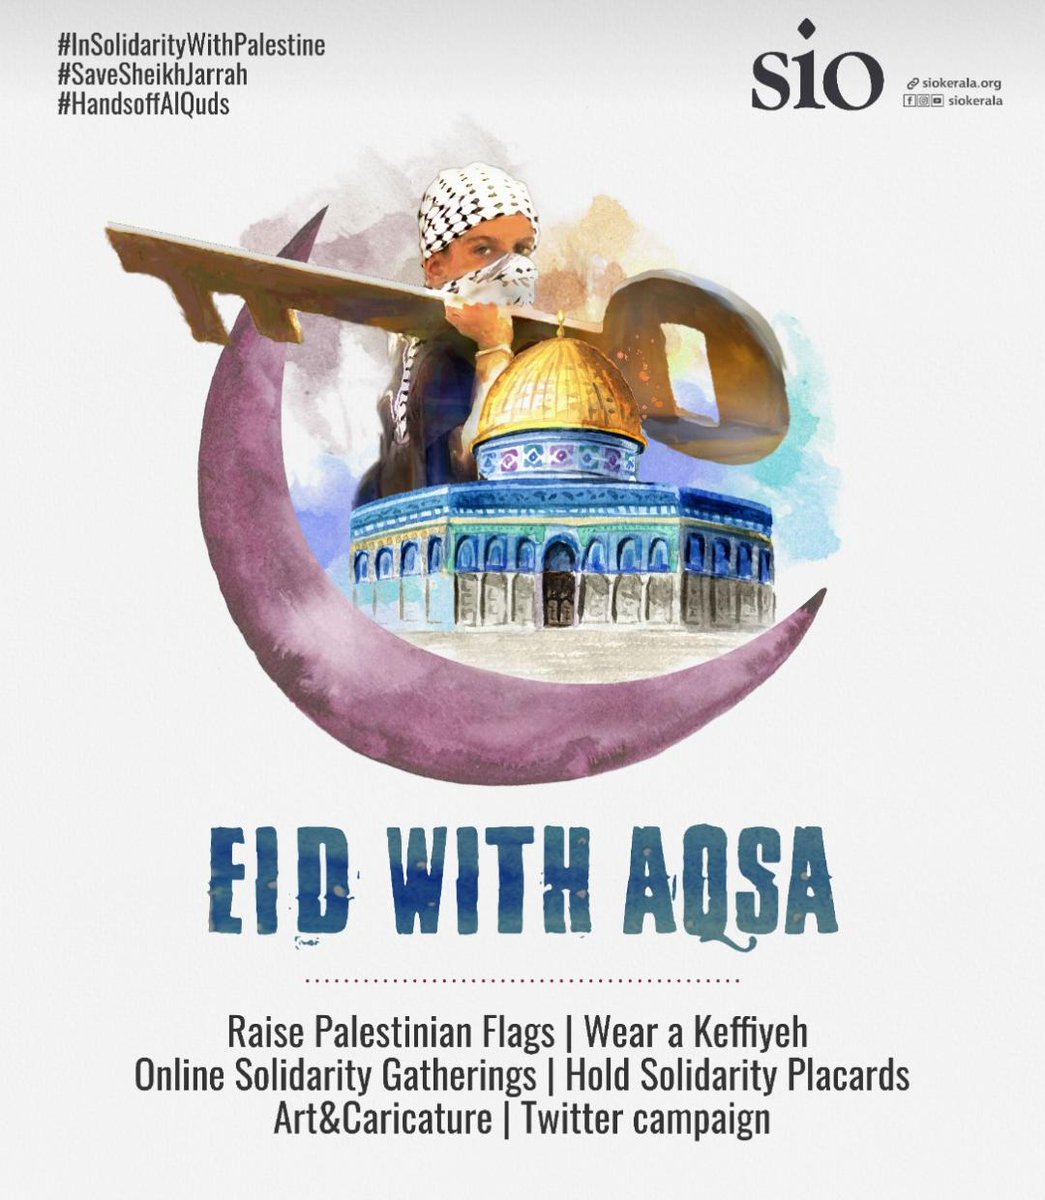 #Eid with #Aqsa 
Raise #Palestinian  Flags
Wear a Keffiyeh
Hold Solidarity Placards
Art & Caricature
Twitter Campaign

#IndiaStandsWithPalestine
#LongLivePalestine 
#InSolidarityWithPalestine 
#AllahuAkbar